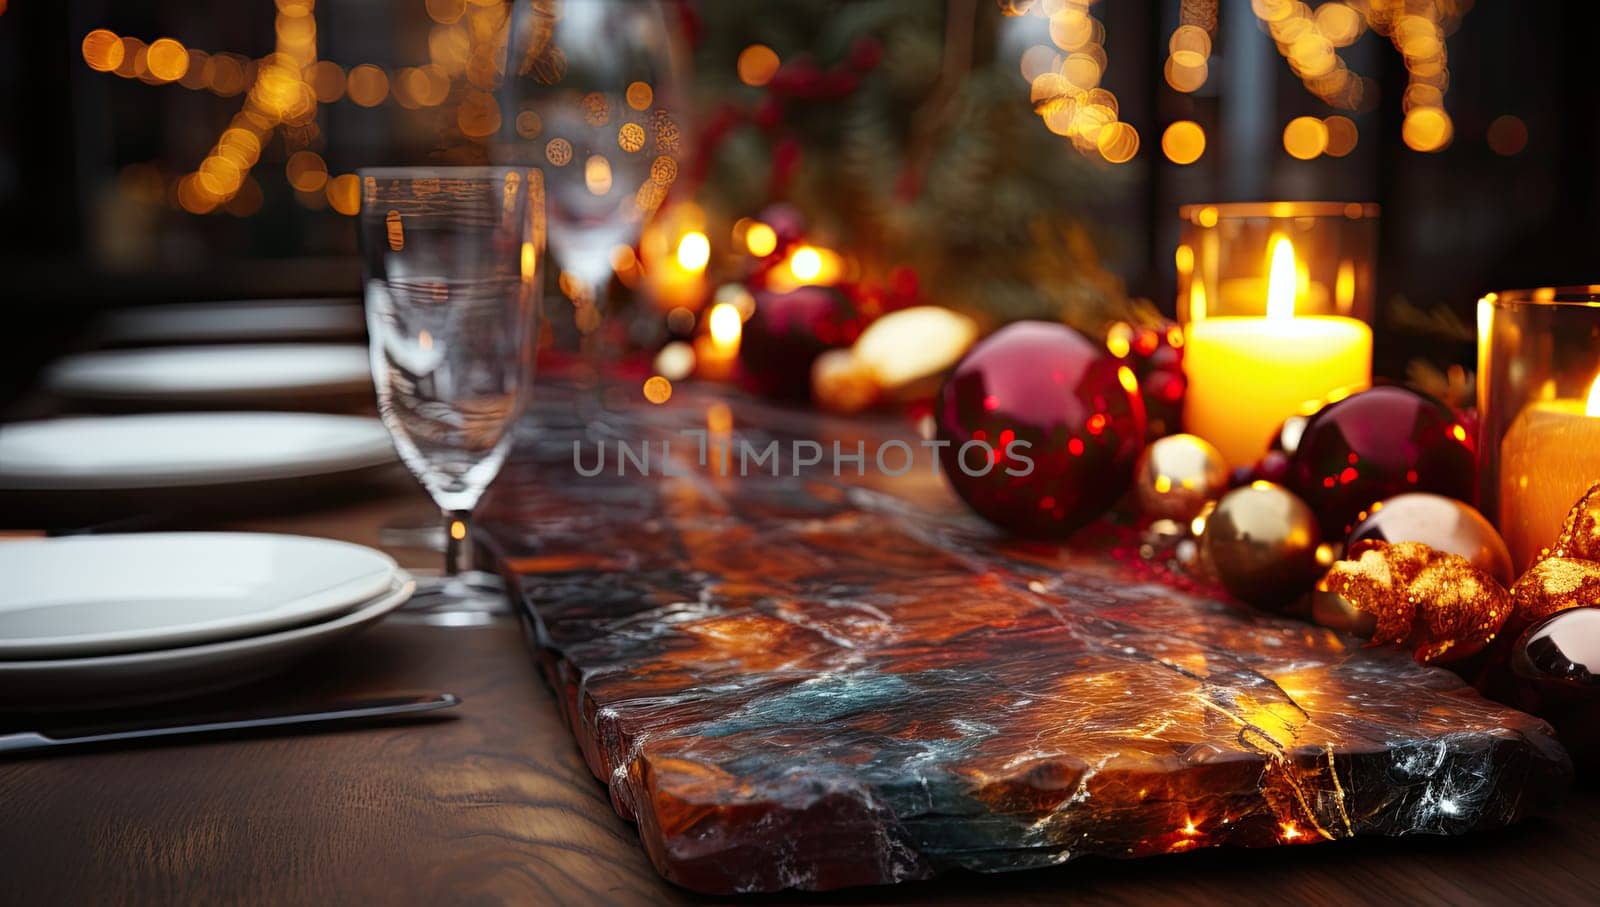 Empty table in front of christmas tree with decorations background. For product display montage.